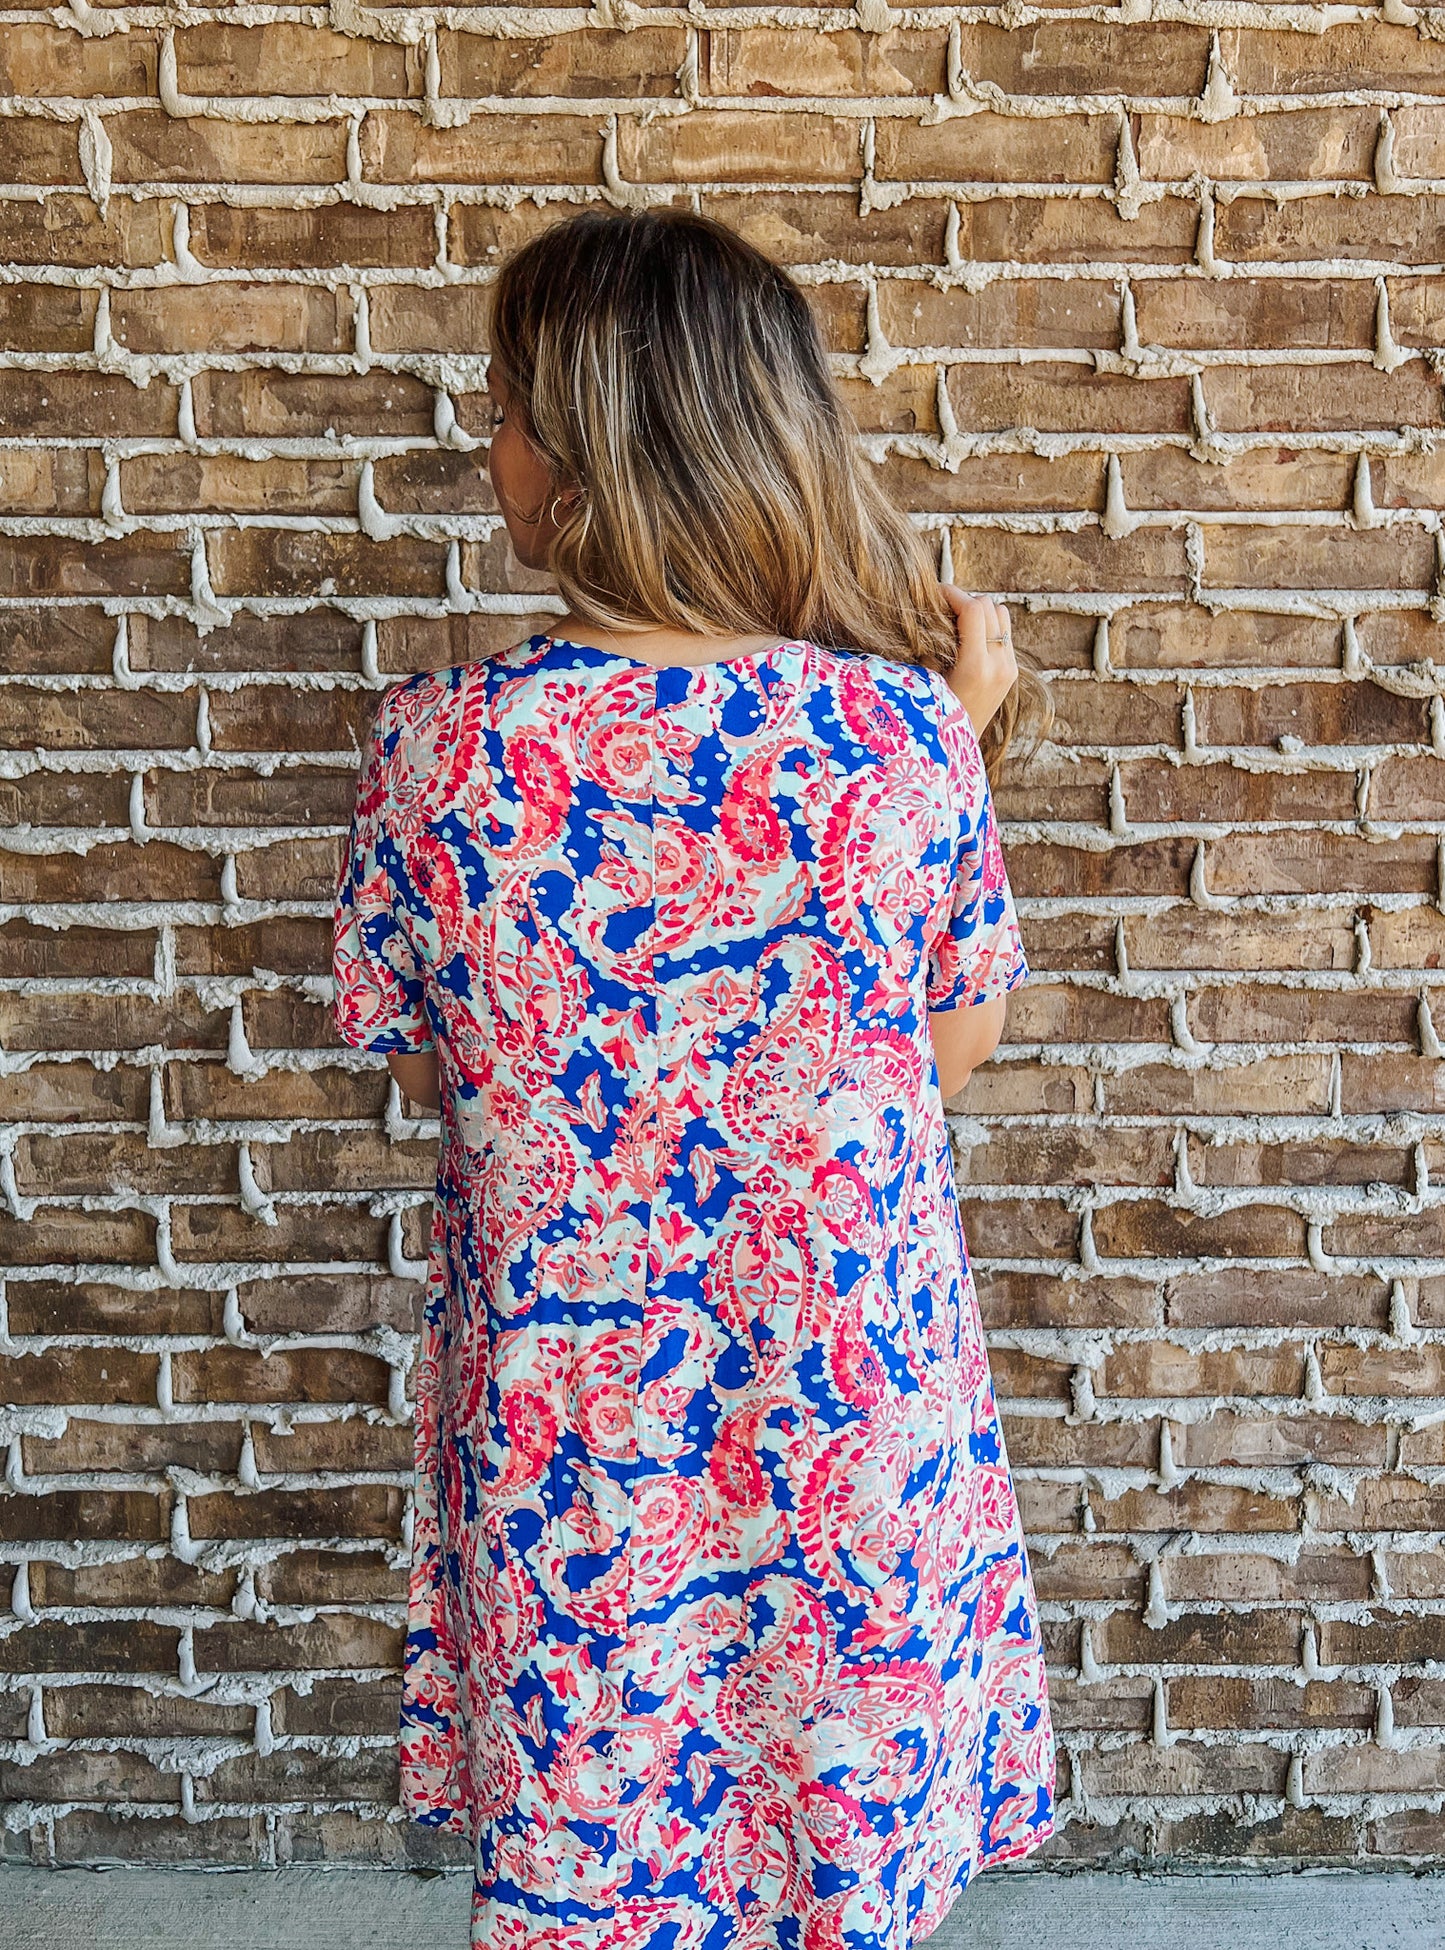 Blossoms Of Passion Royal Blue Pink Floral Dress